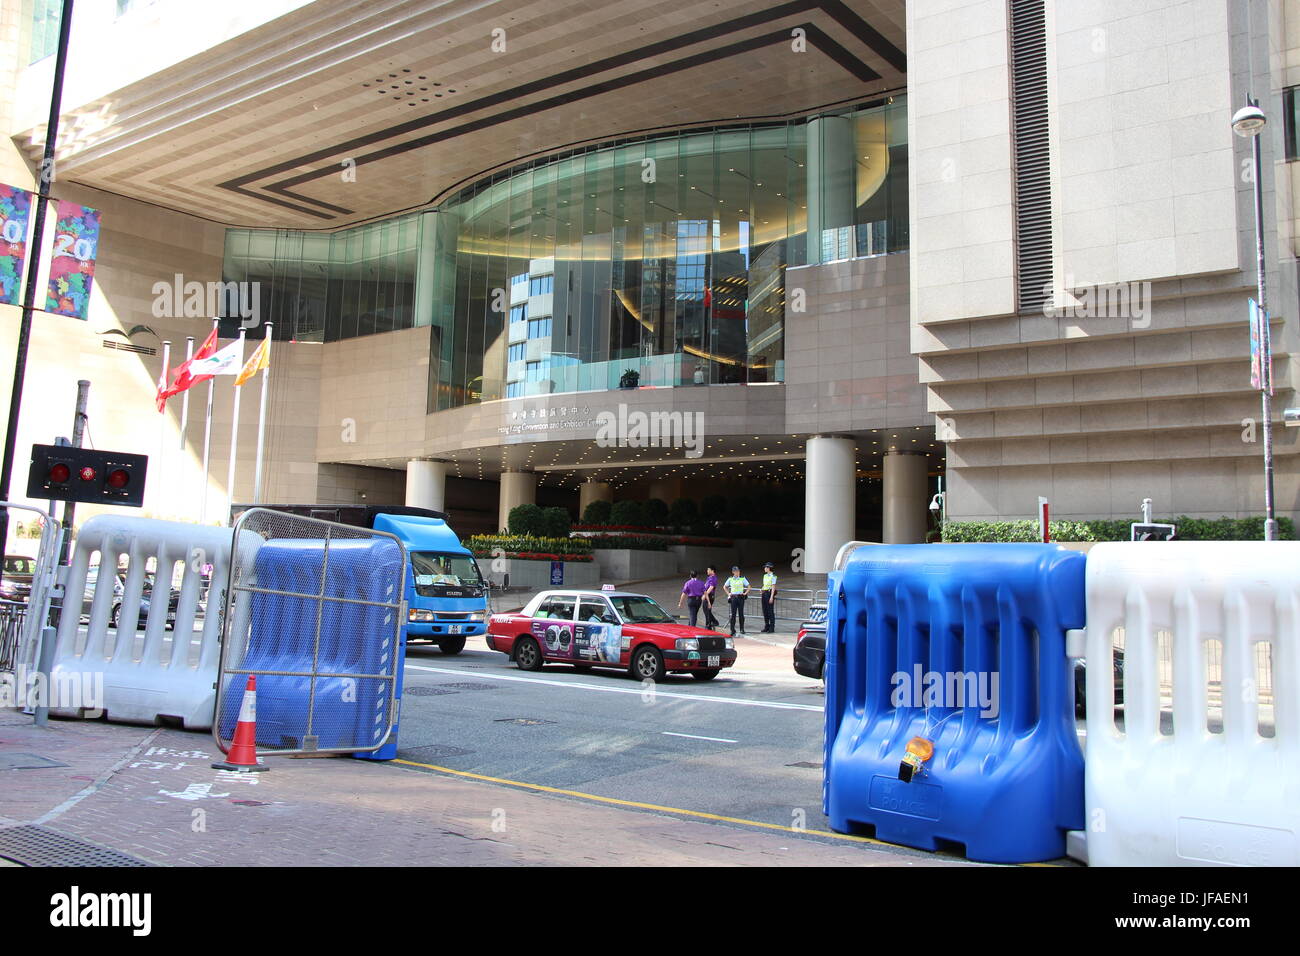 Barricades set up by police on Harbour Road, Wanchai, guarding President Xi Jinping in the Convention and Exhibition Centre opposite the fire station Stock Photo